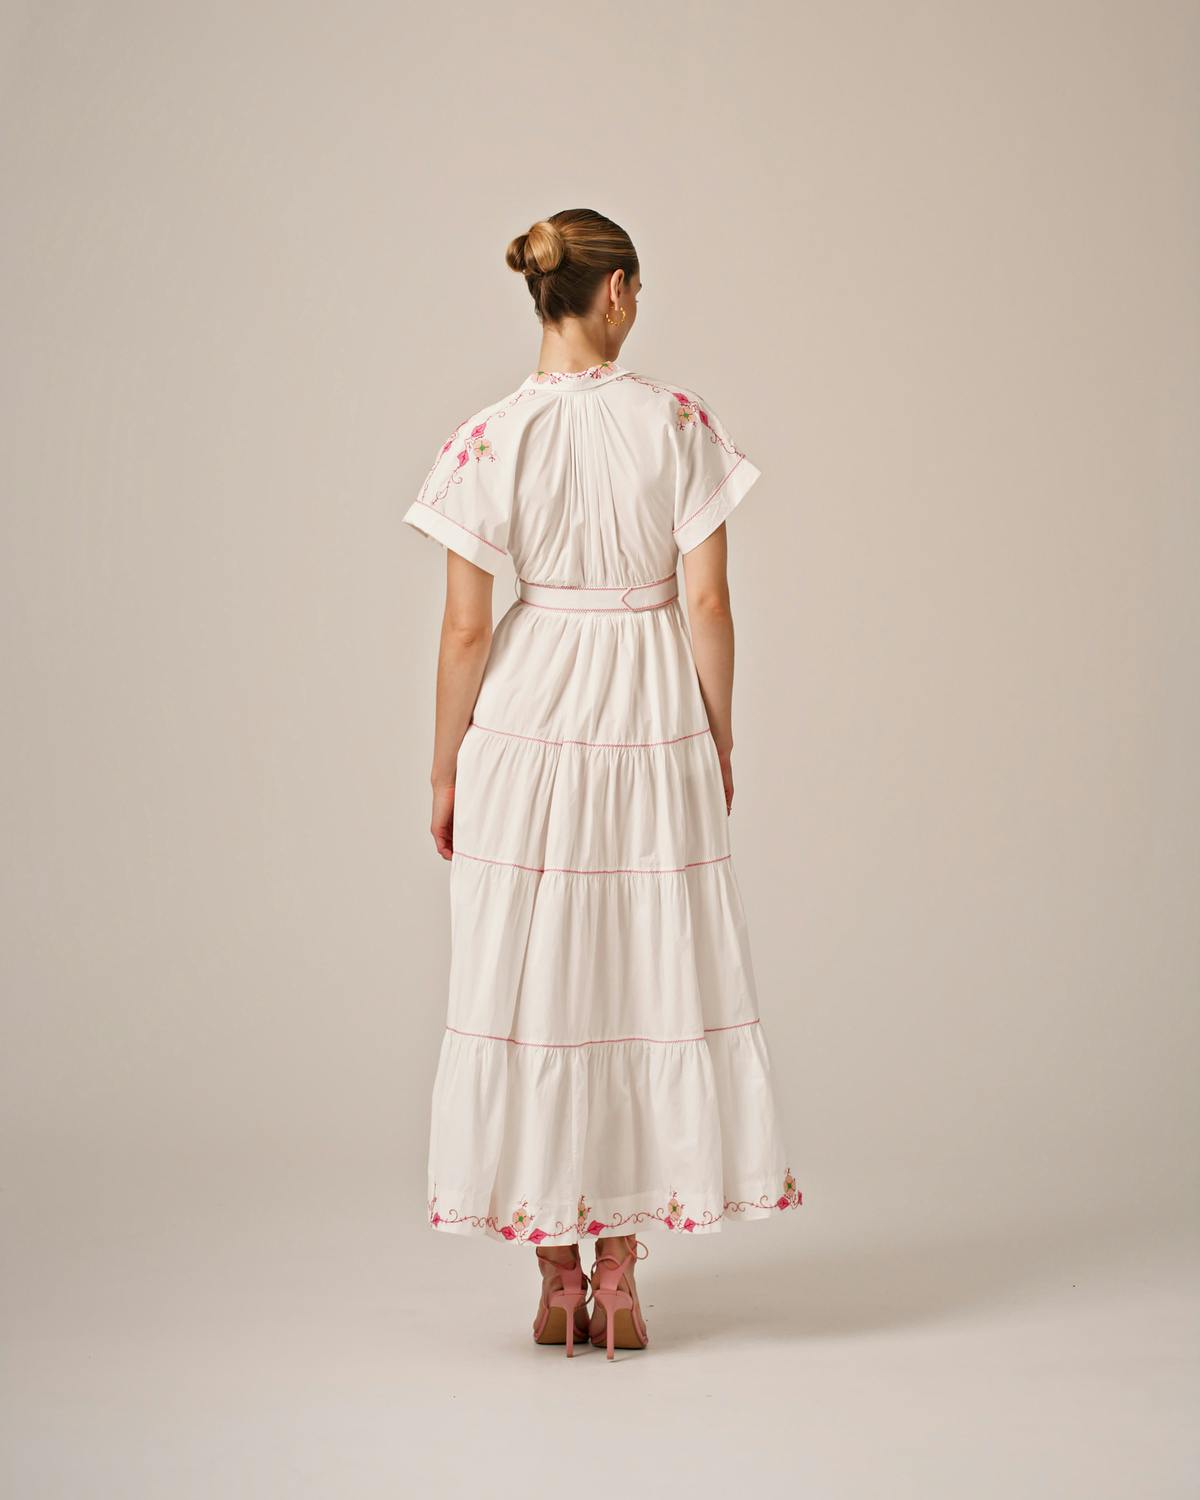 Poplin Embroidered Shirt Dress, White With Embroidery. Image #4